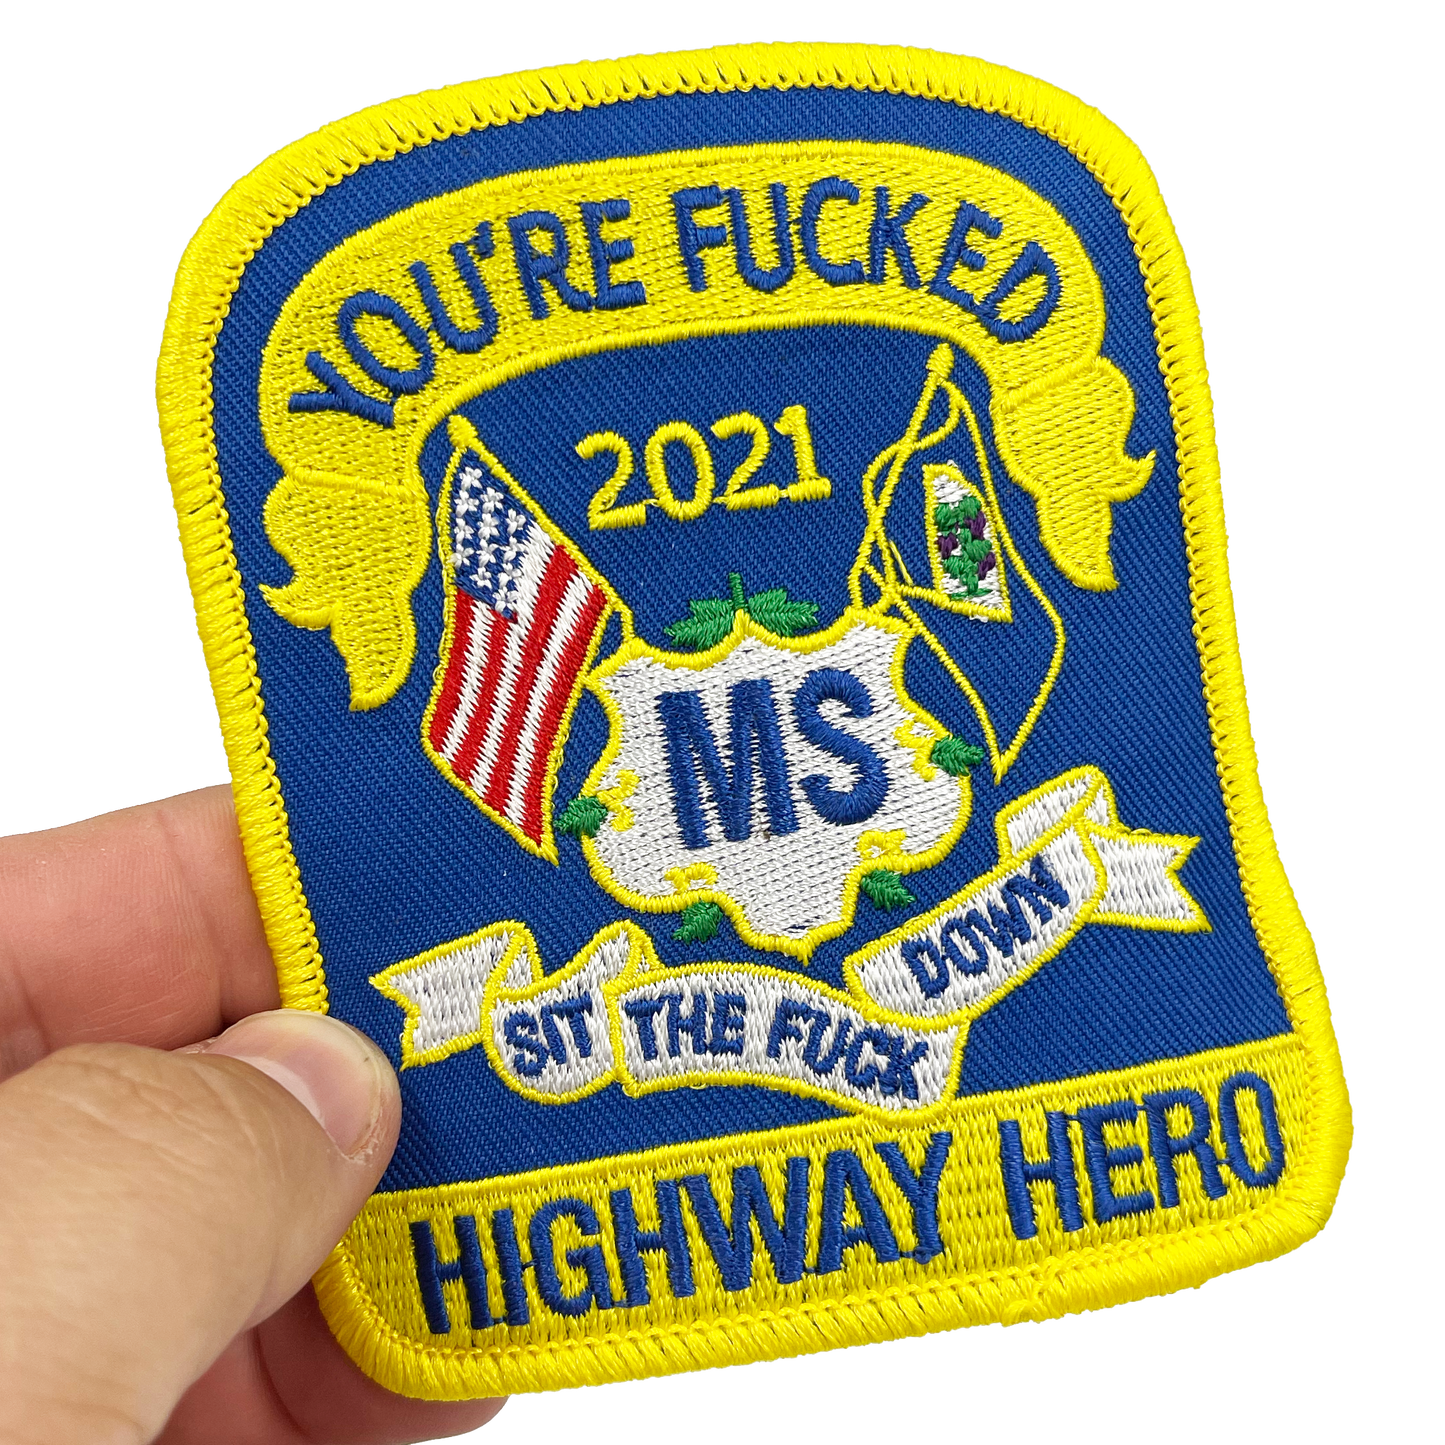 EL4-011 Trooper Matthew Spina inspired Connecticut Highway Patrol Police Parody Patch